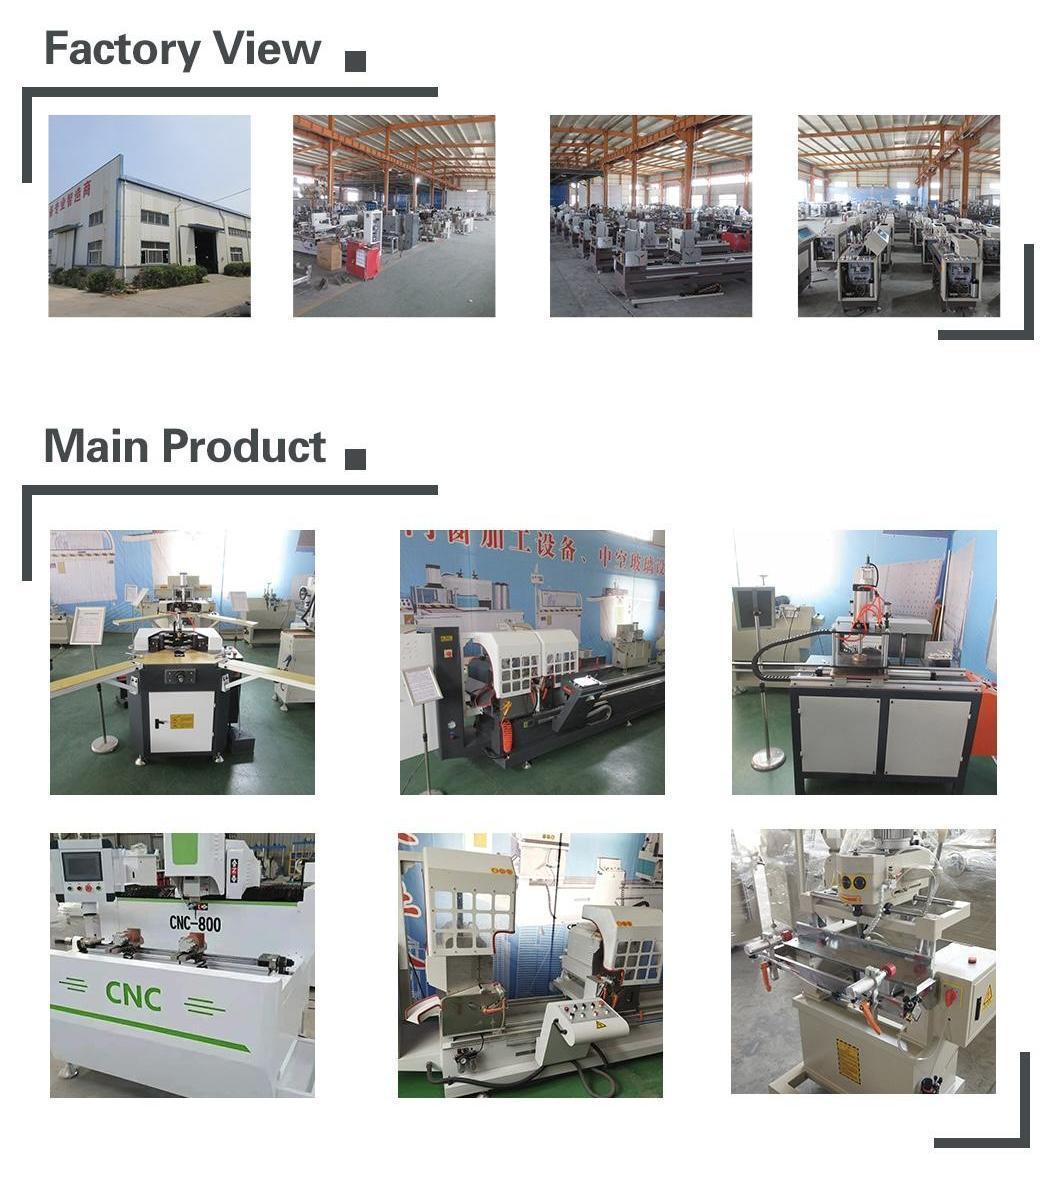 Lzj-120 Synchronous CNC Machine Set Angle Machine of Aluminum Doors and Windows for Production Line of Corner Combining